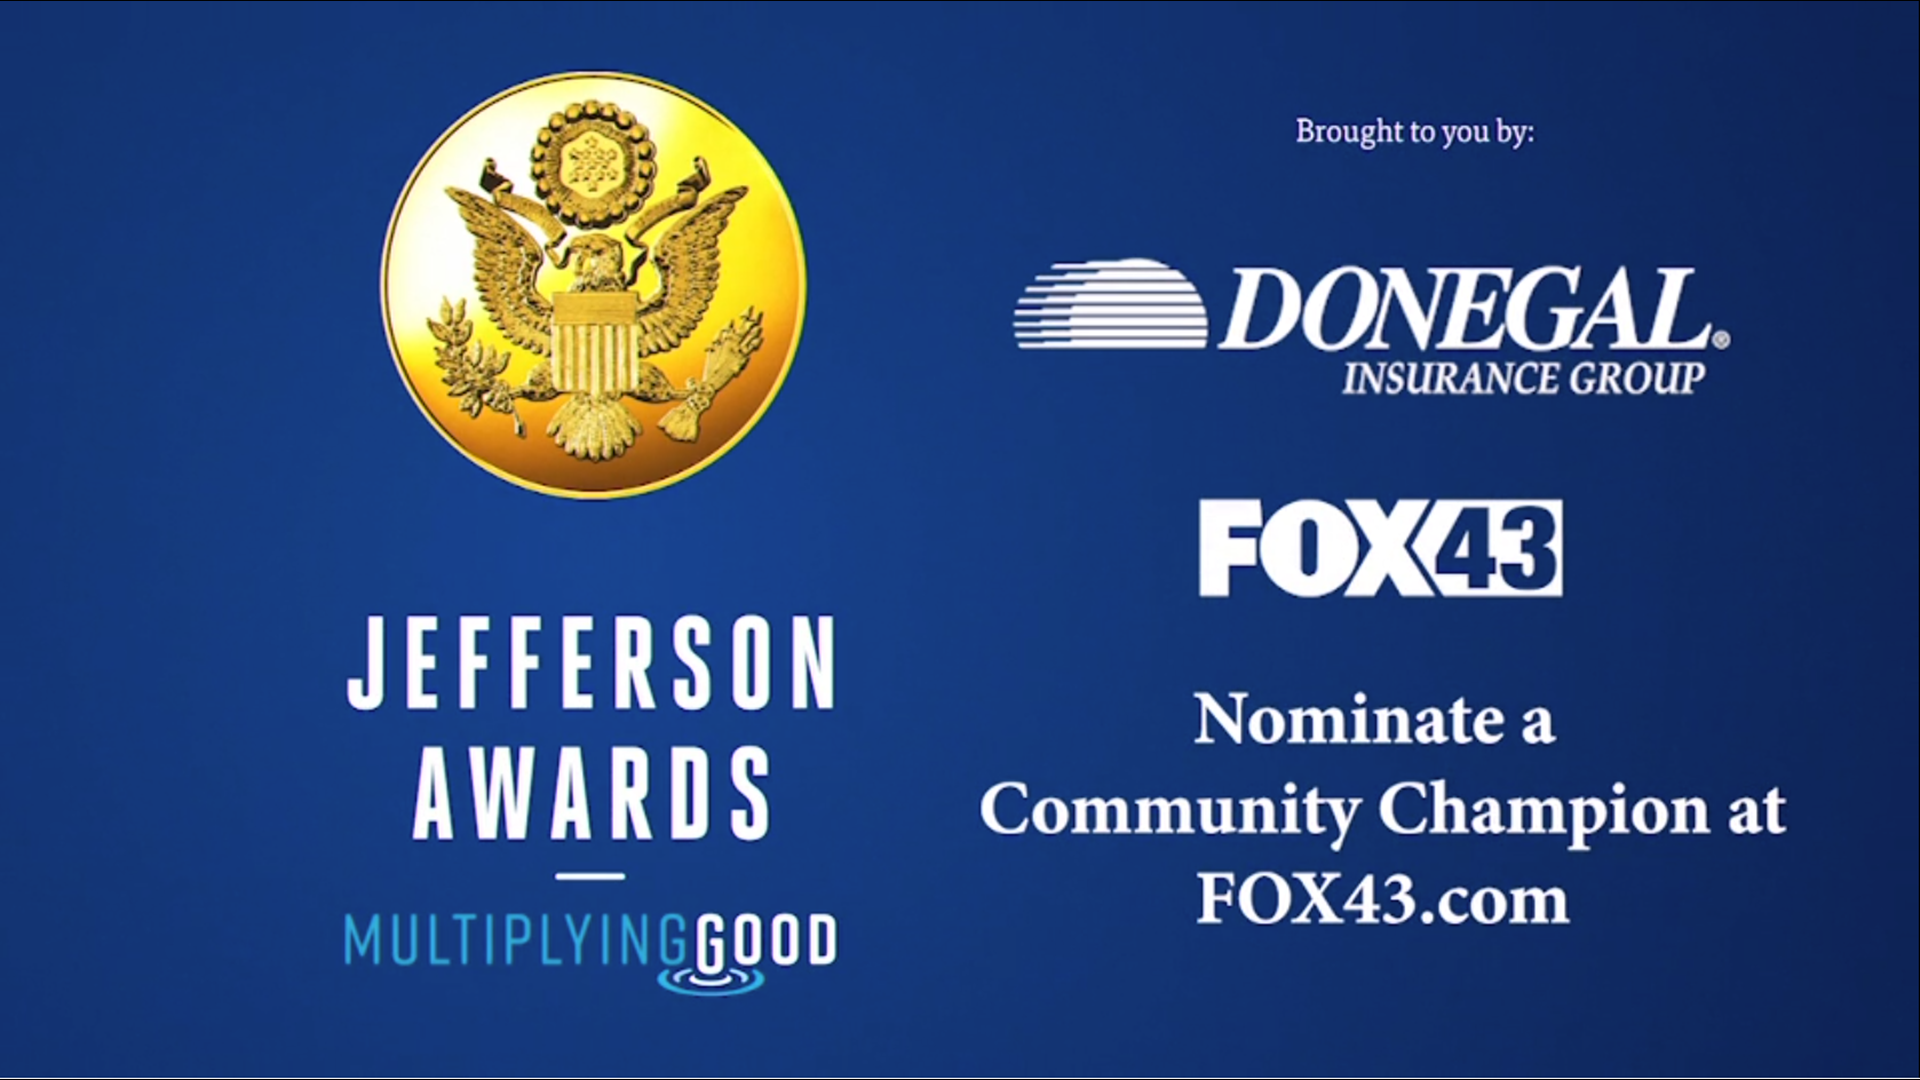 The Jefferson Awards are the country's longest standing and most prestigious celebration of public service. This year's national ceremony was held Nov. 2.